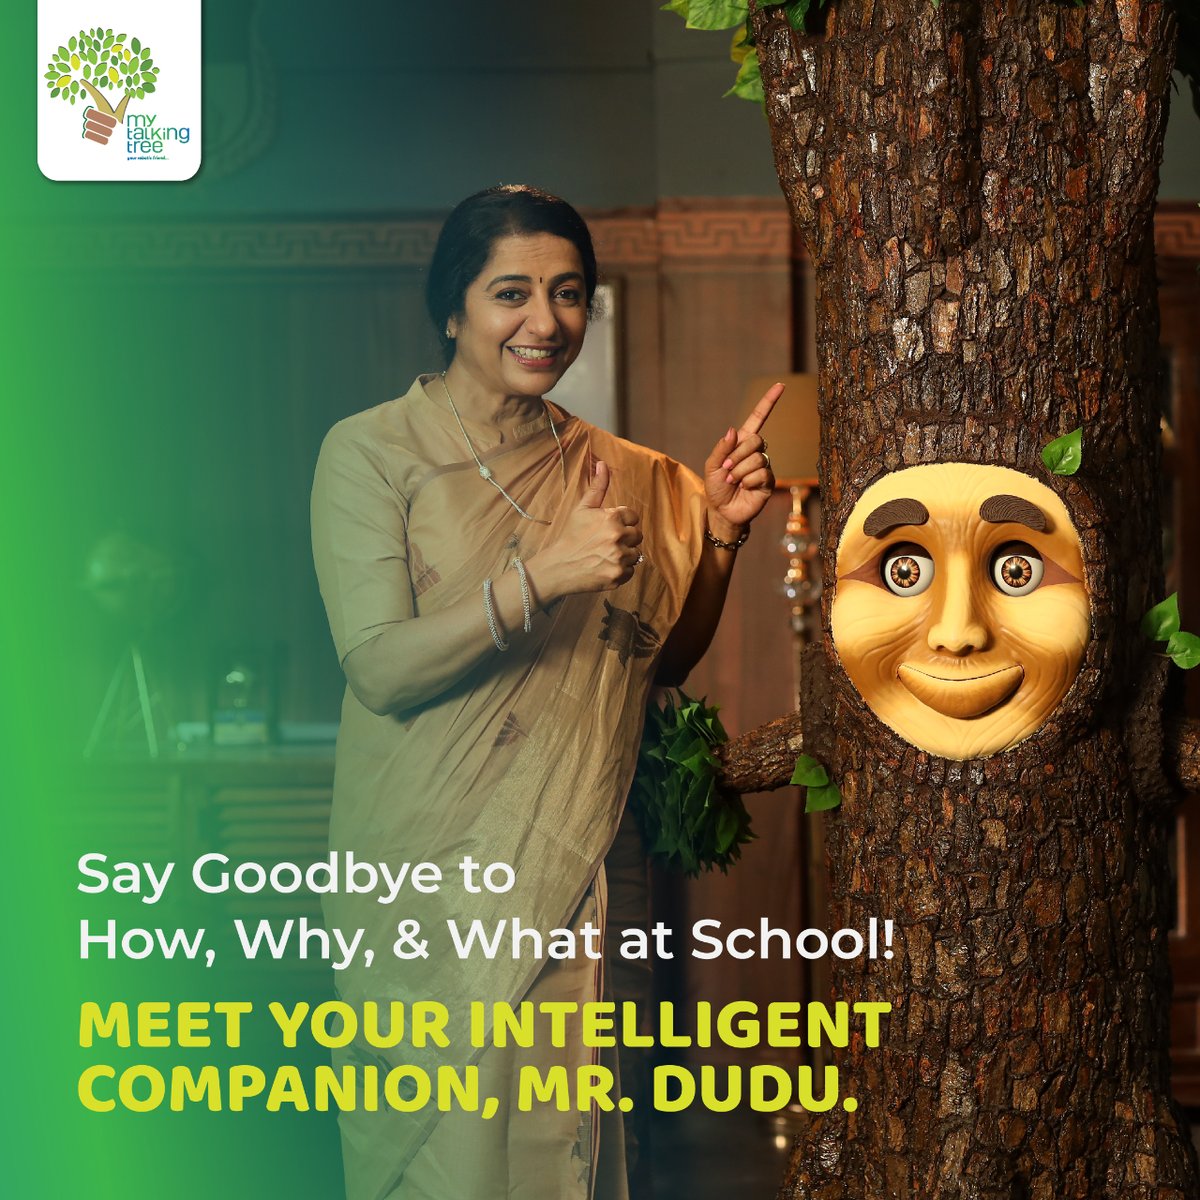 Cultivate a love for learning in children! Mr. Dudu personalizes learning and ignites a passion for understanding and discovery in every student. 

#Mytalkingtree #mrdudu #robotic #InteractiveLearning #RoboticTeacher #TechnologyinEducation #RoboEducator #hyperactivekids